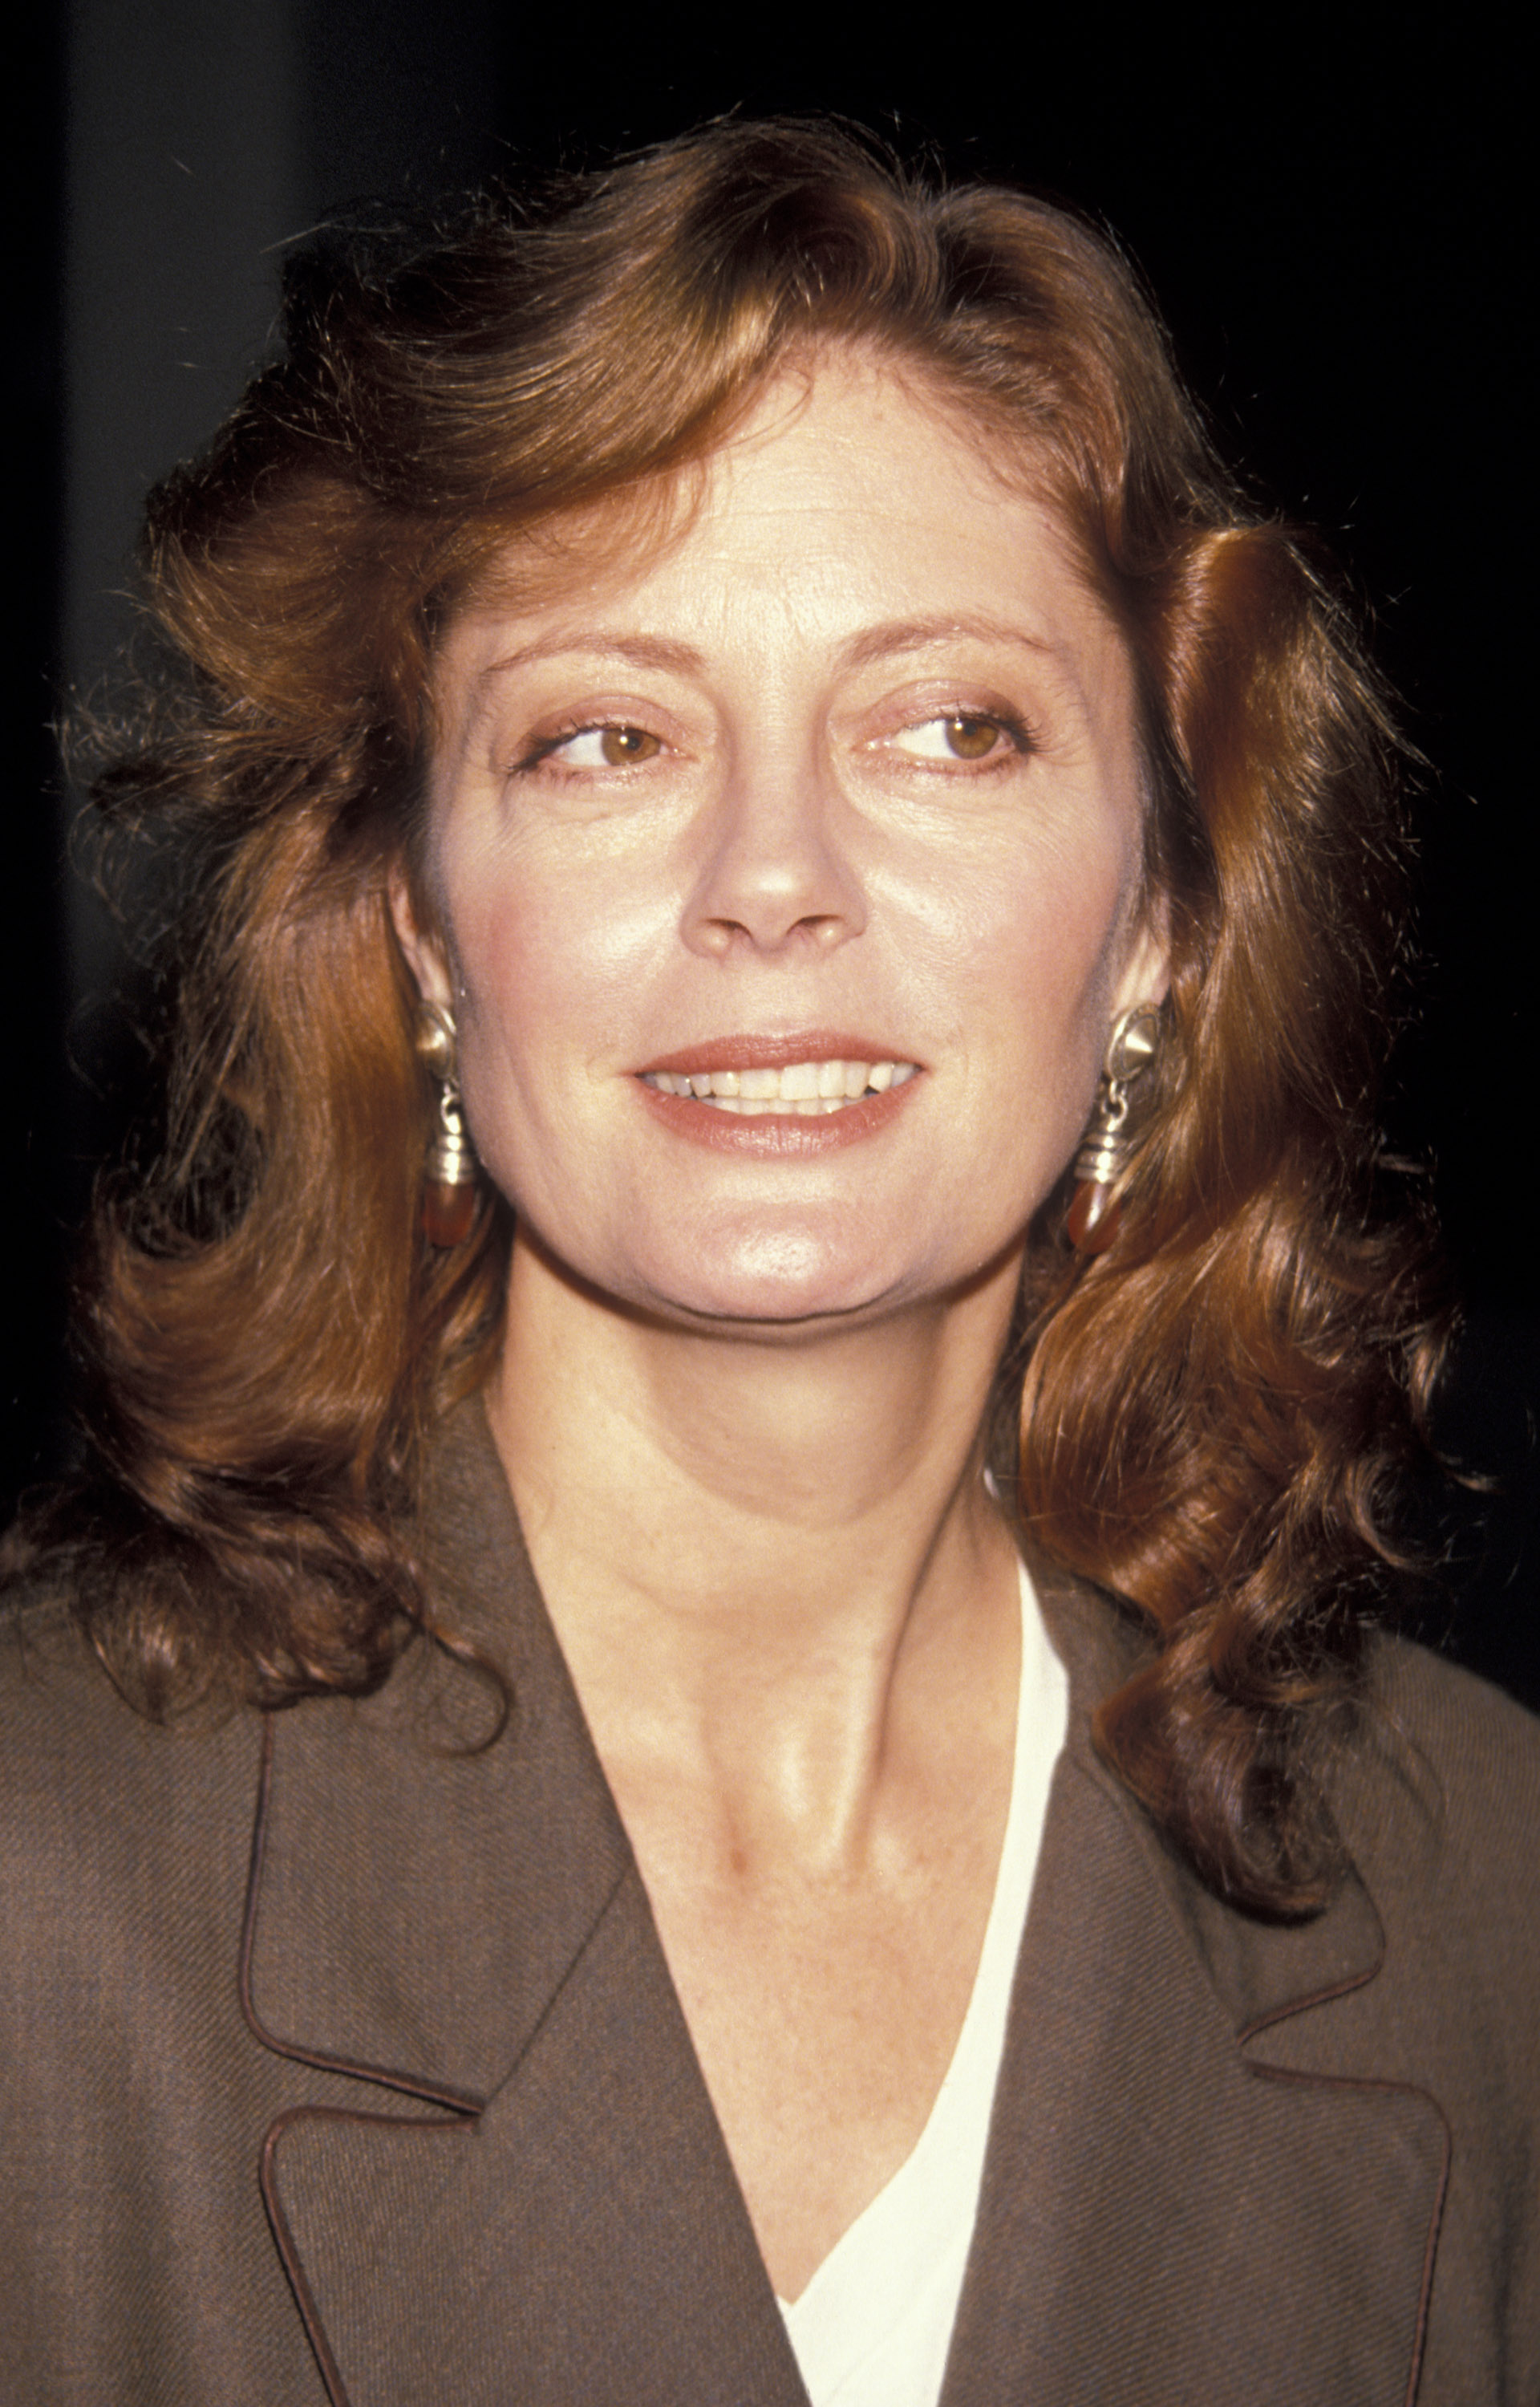 Susan Sarandon attends the 51st Annual Booker Club Awards Luncheon on November 1, 1990 in New York City | Source: Getty Images